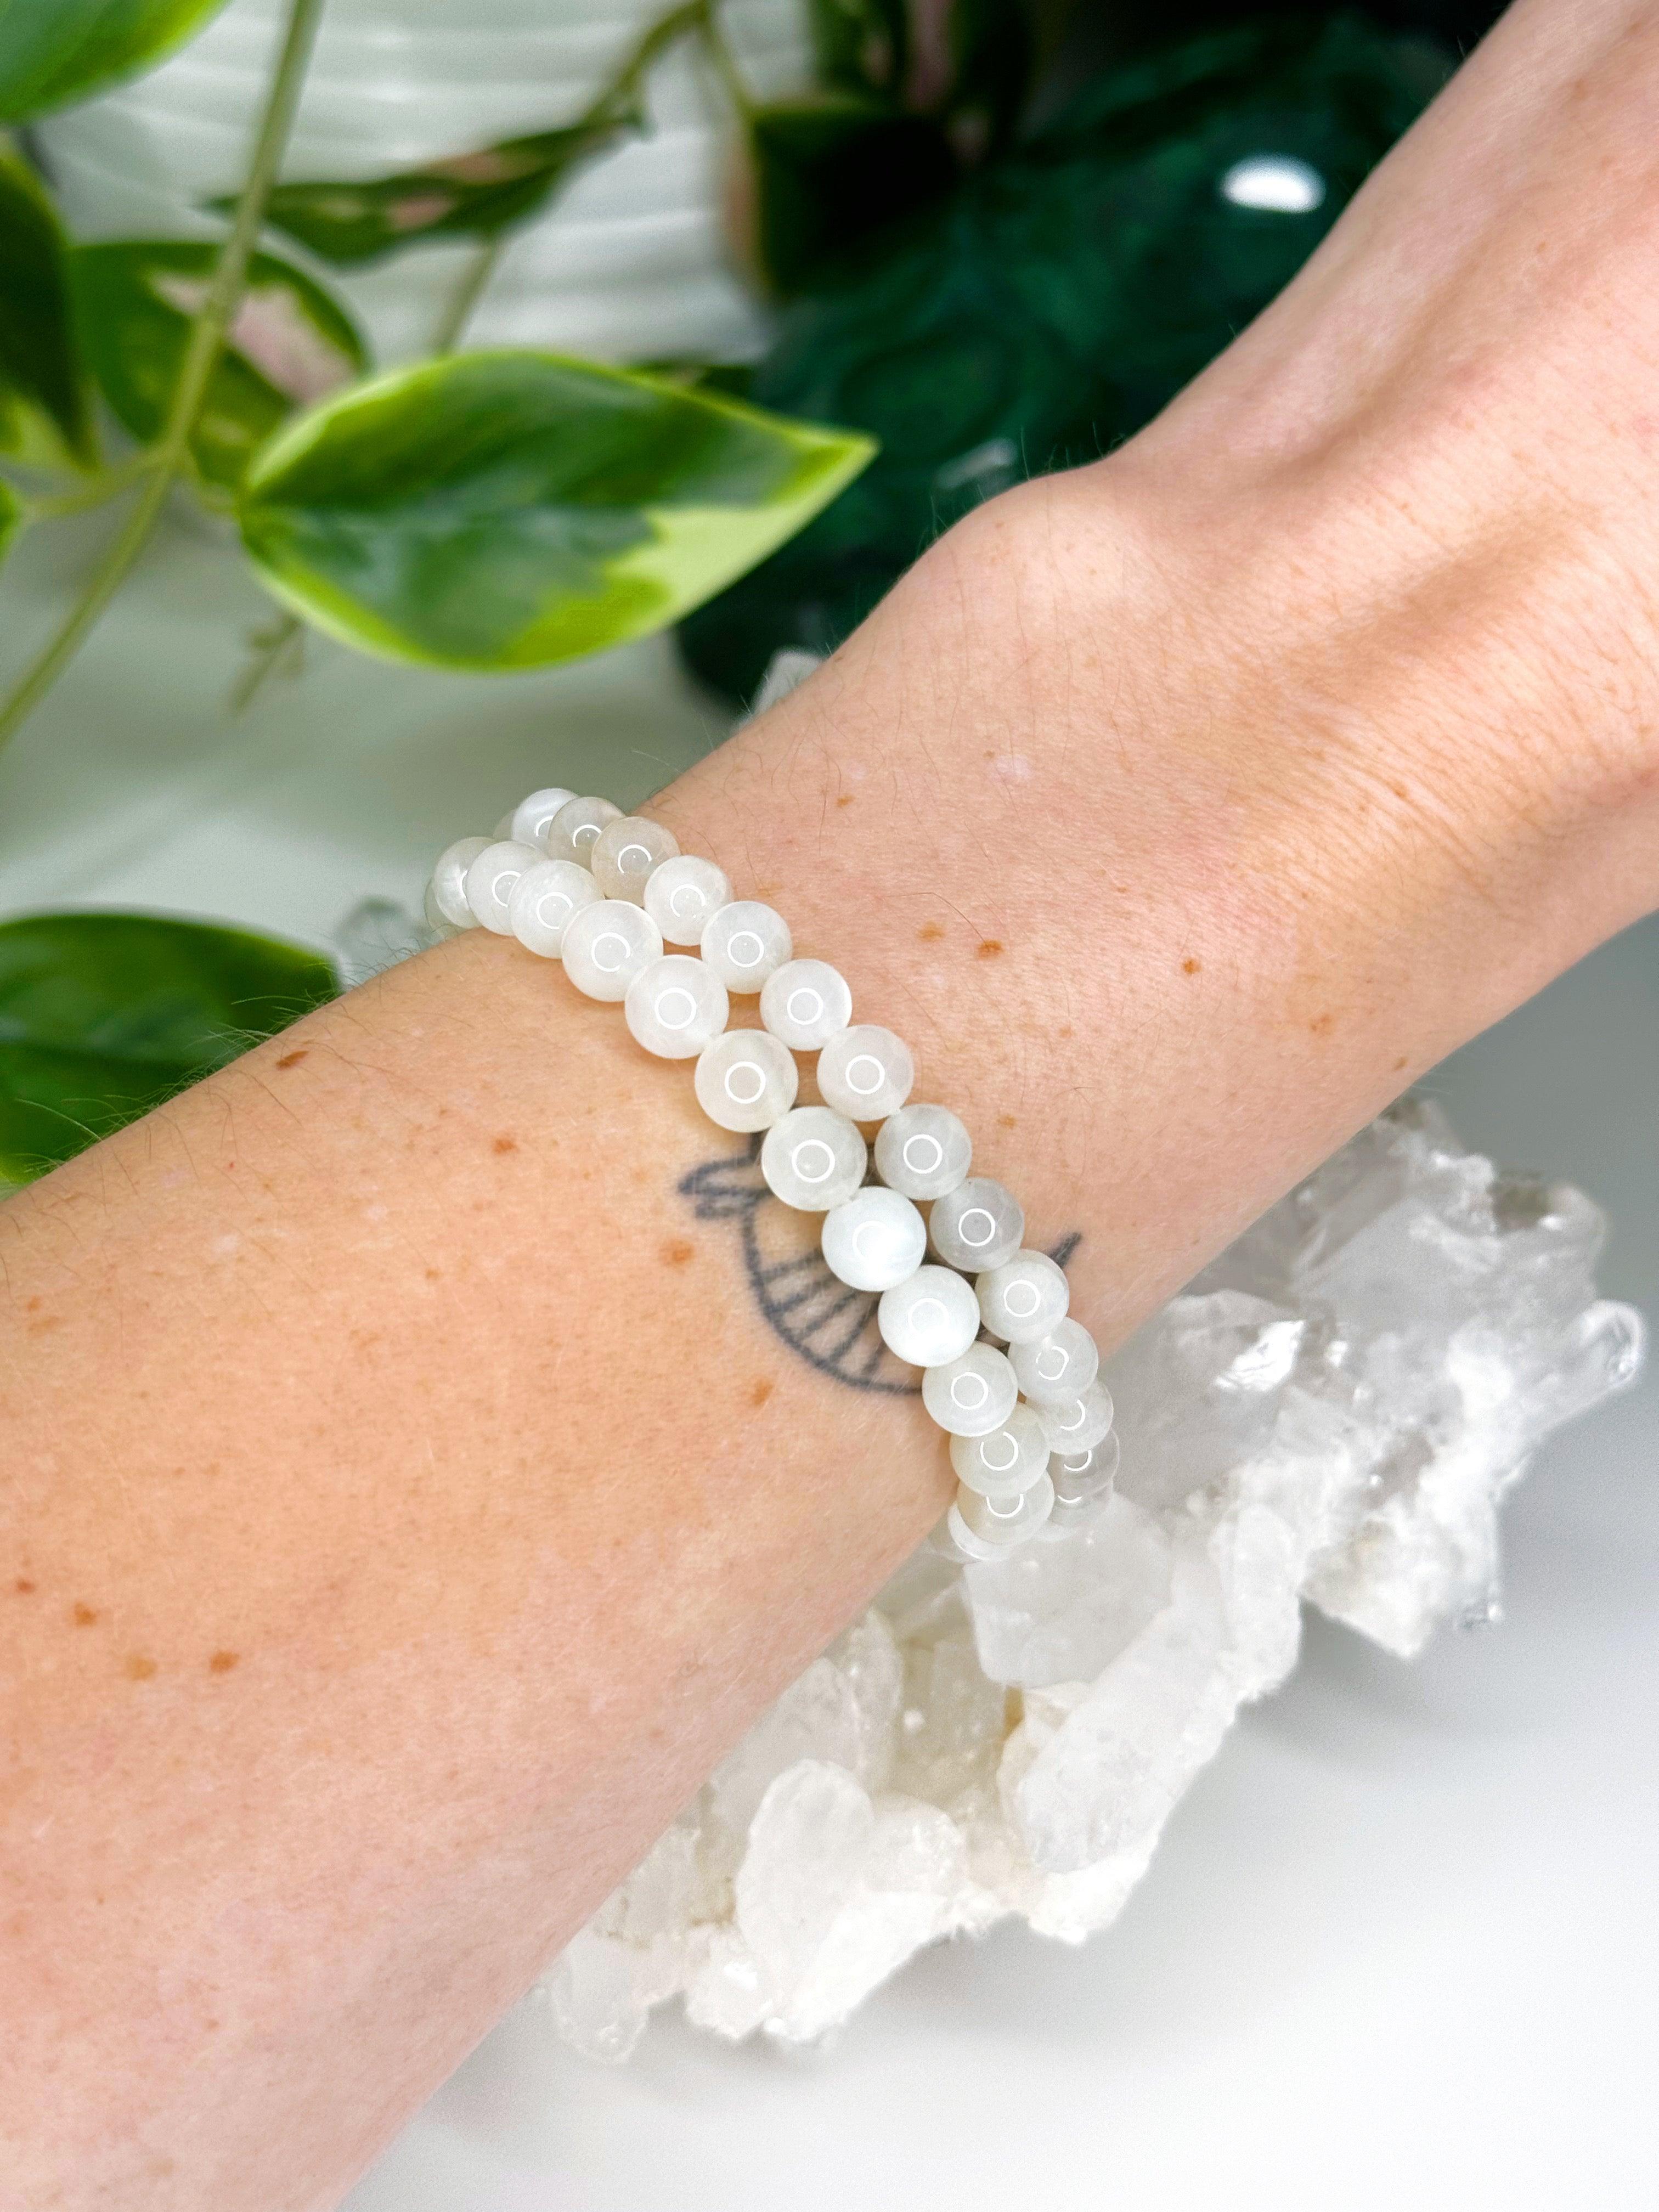 CHATOYANT WHITE MOONSTONE 6mm - HANDMADE CRYSTAL BRACELET - 6mm, air, april astro, aquarius, aquarius stack, bracelet, cancer, cancer stack, clear/white, crystal bracelet, emotional support, fertility, gemini, gemini stack, handmade bracelet, jewelry, joy gift bundle, libra, libra stack, market bracelet, may day/beltane, moonstone, new beginnings gift bundle, pisces, pisces stack, recently added, virgo, virgo stack, Wearable, winter collection, winter solstice collection - The Mineral Maven